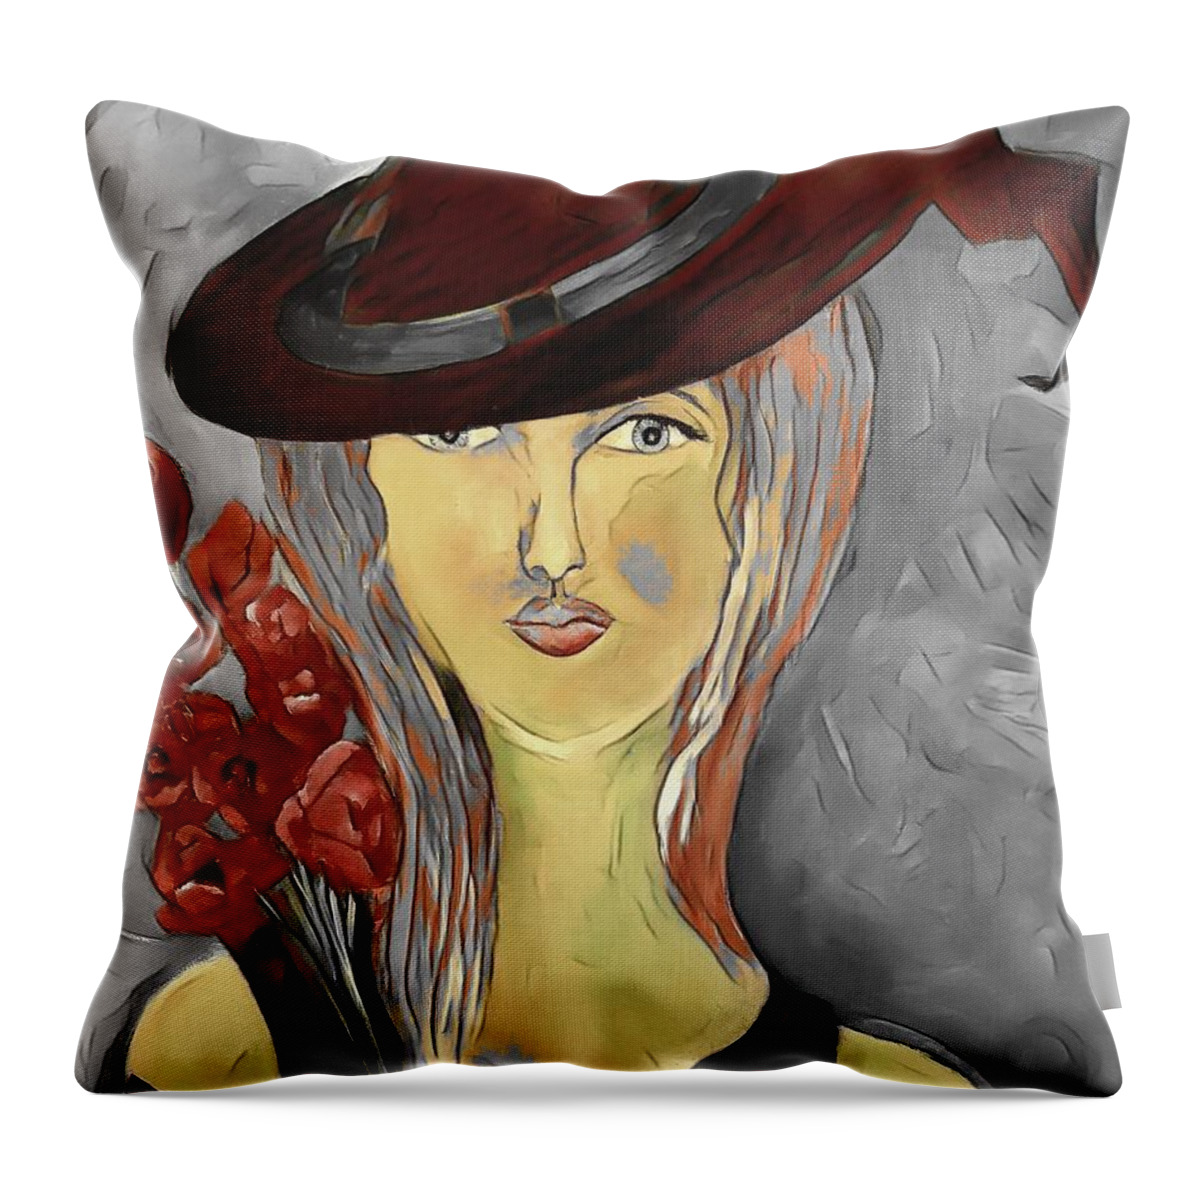 Cute Throw Pillow featuring the digital art Her Hat Becomes Her Painting by Lisa Kaiser